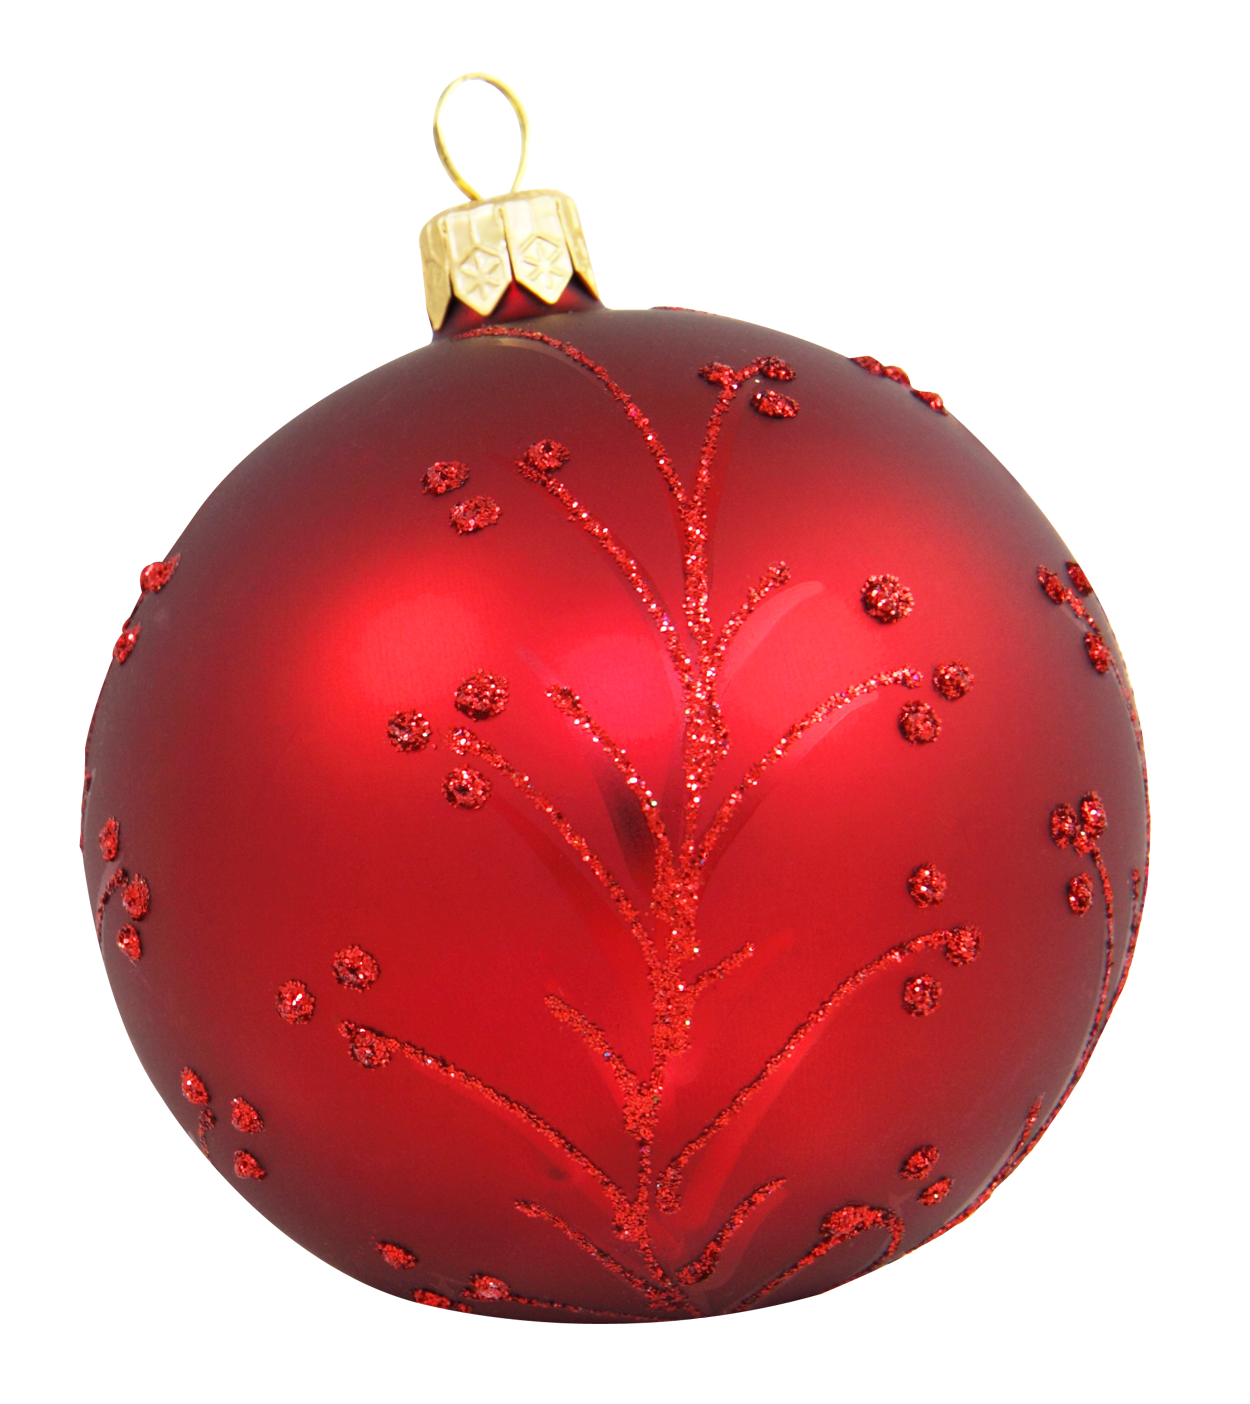 Christmas Ball Ornaments Image PNG Transparent Background, Free ...